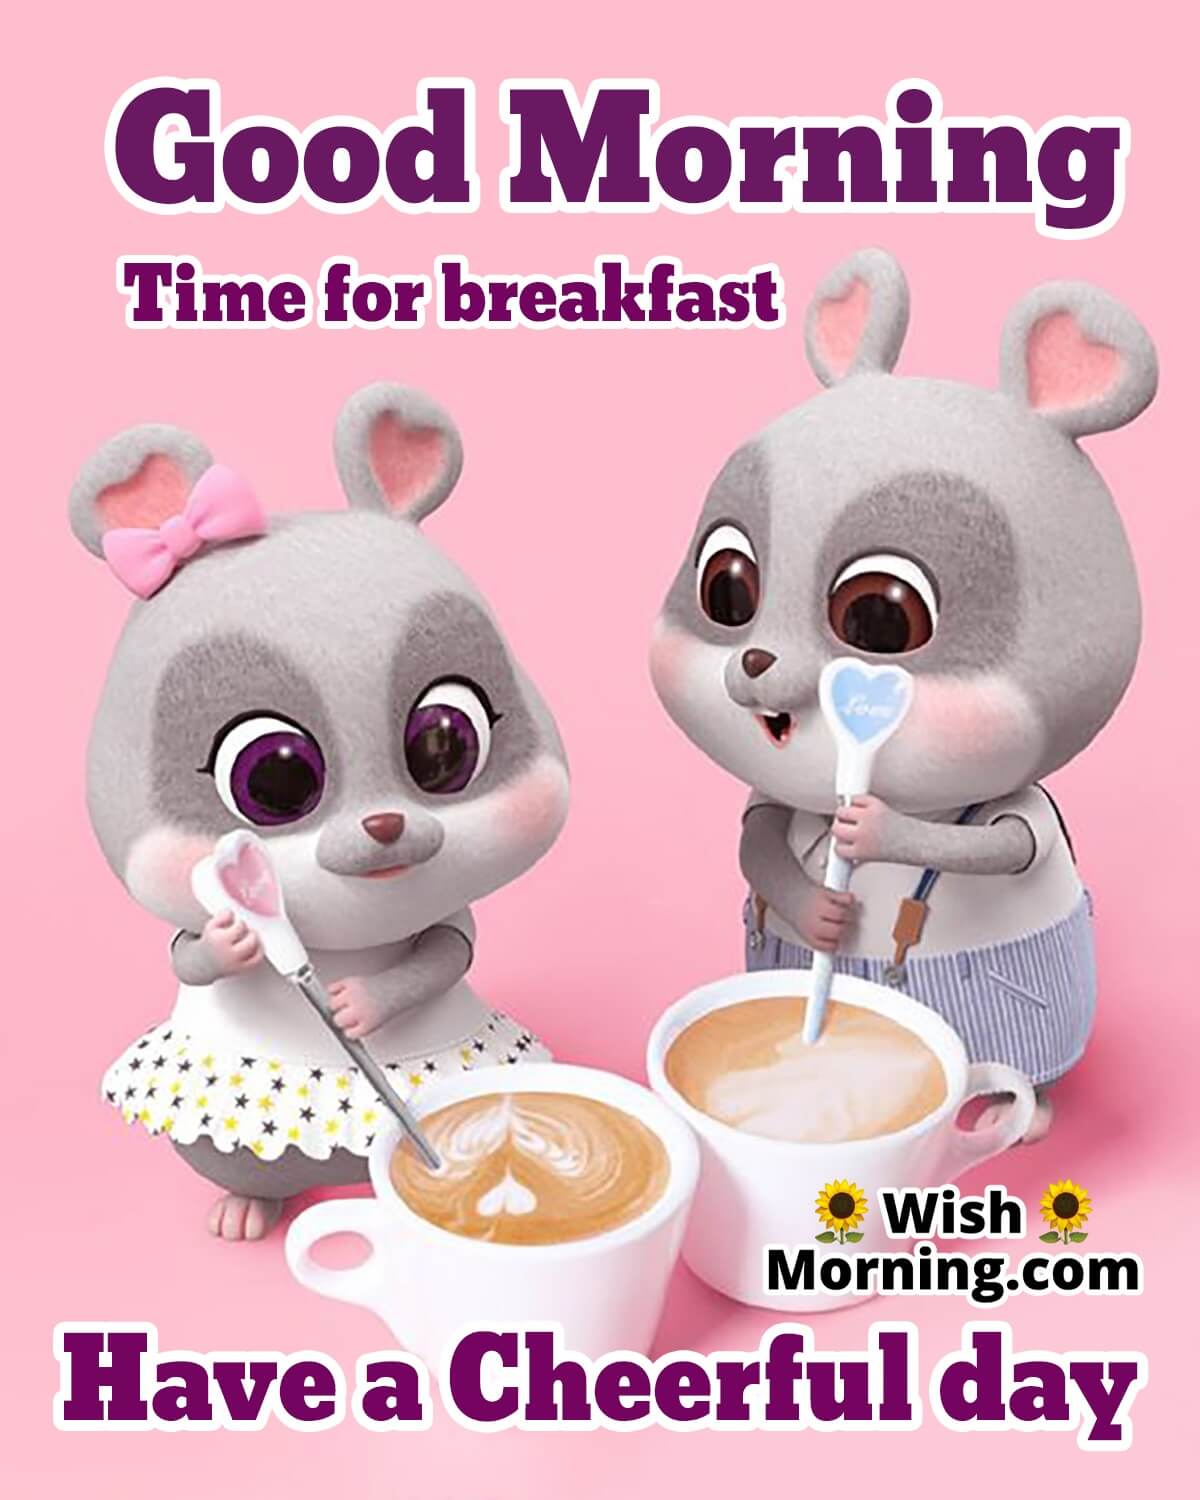 Good Morning Breakfast Time Images - Wish Morning